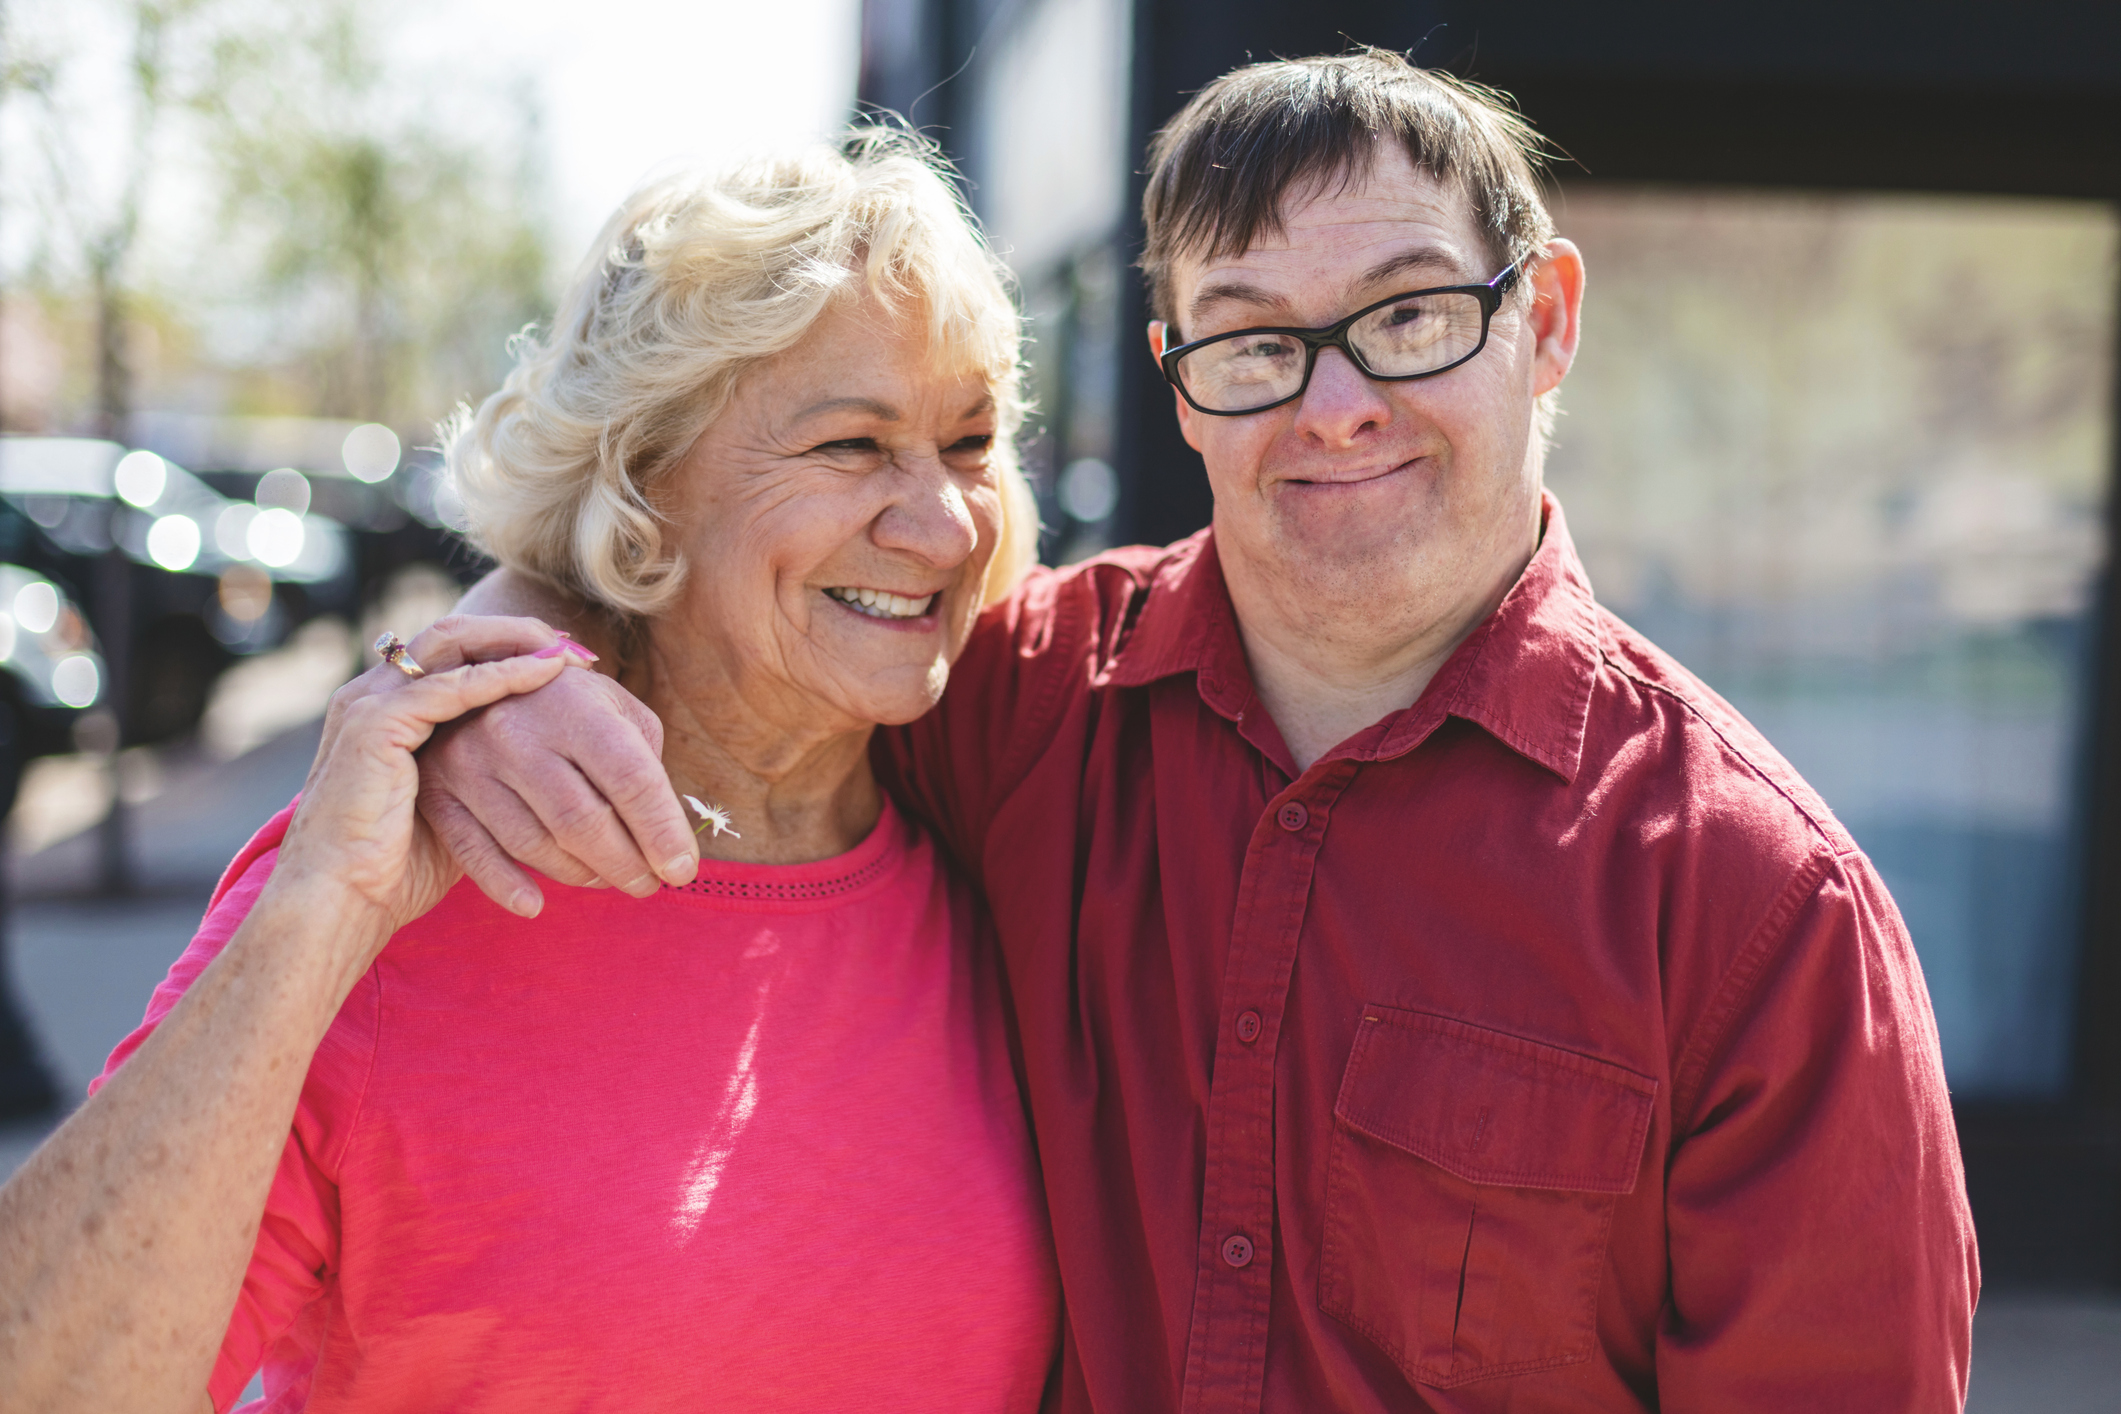 Adult Man with Down Syndrome Outdoors with Senior Female Guardian